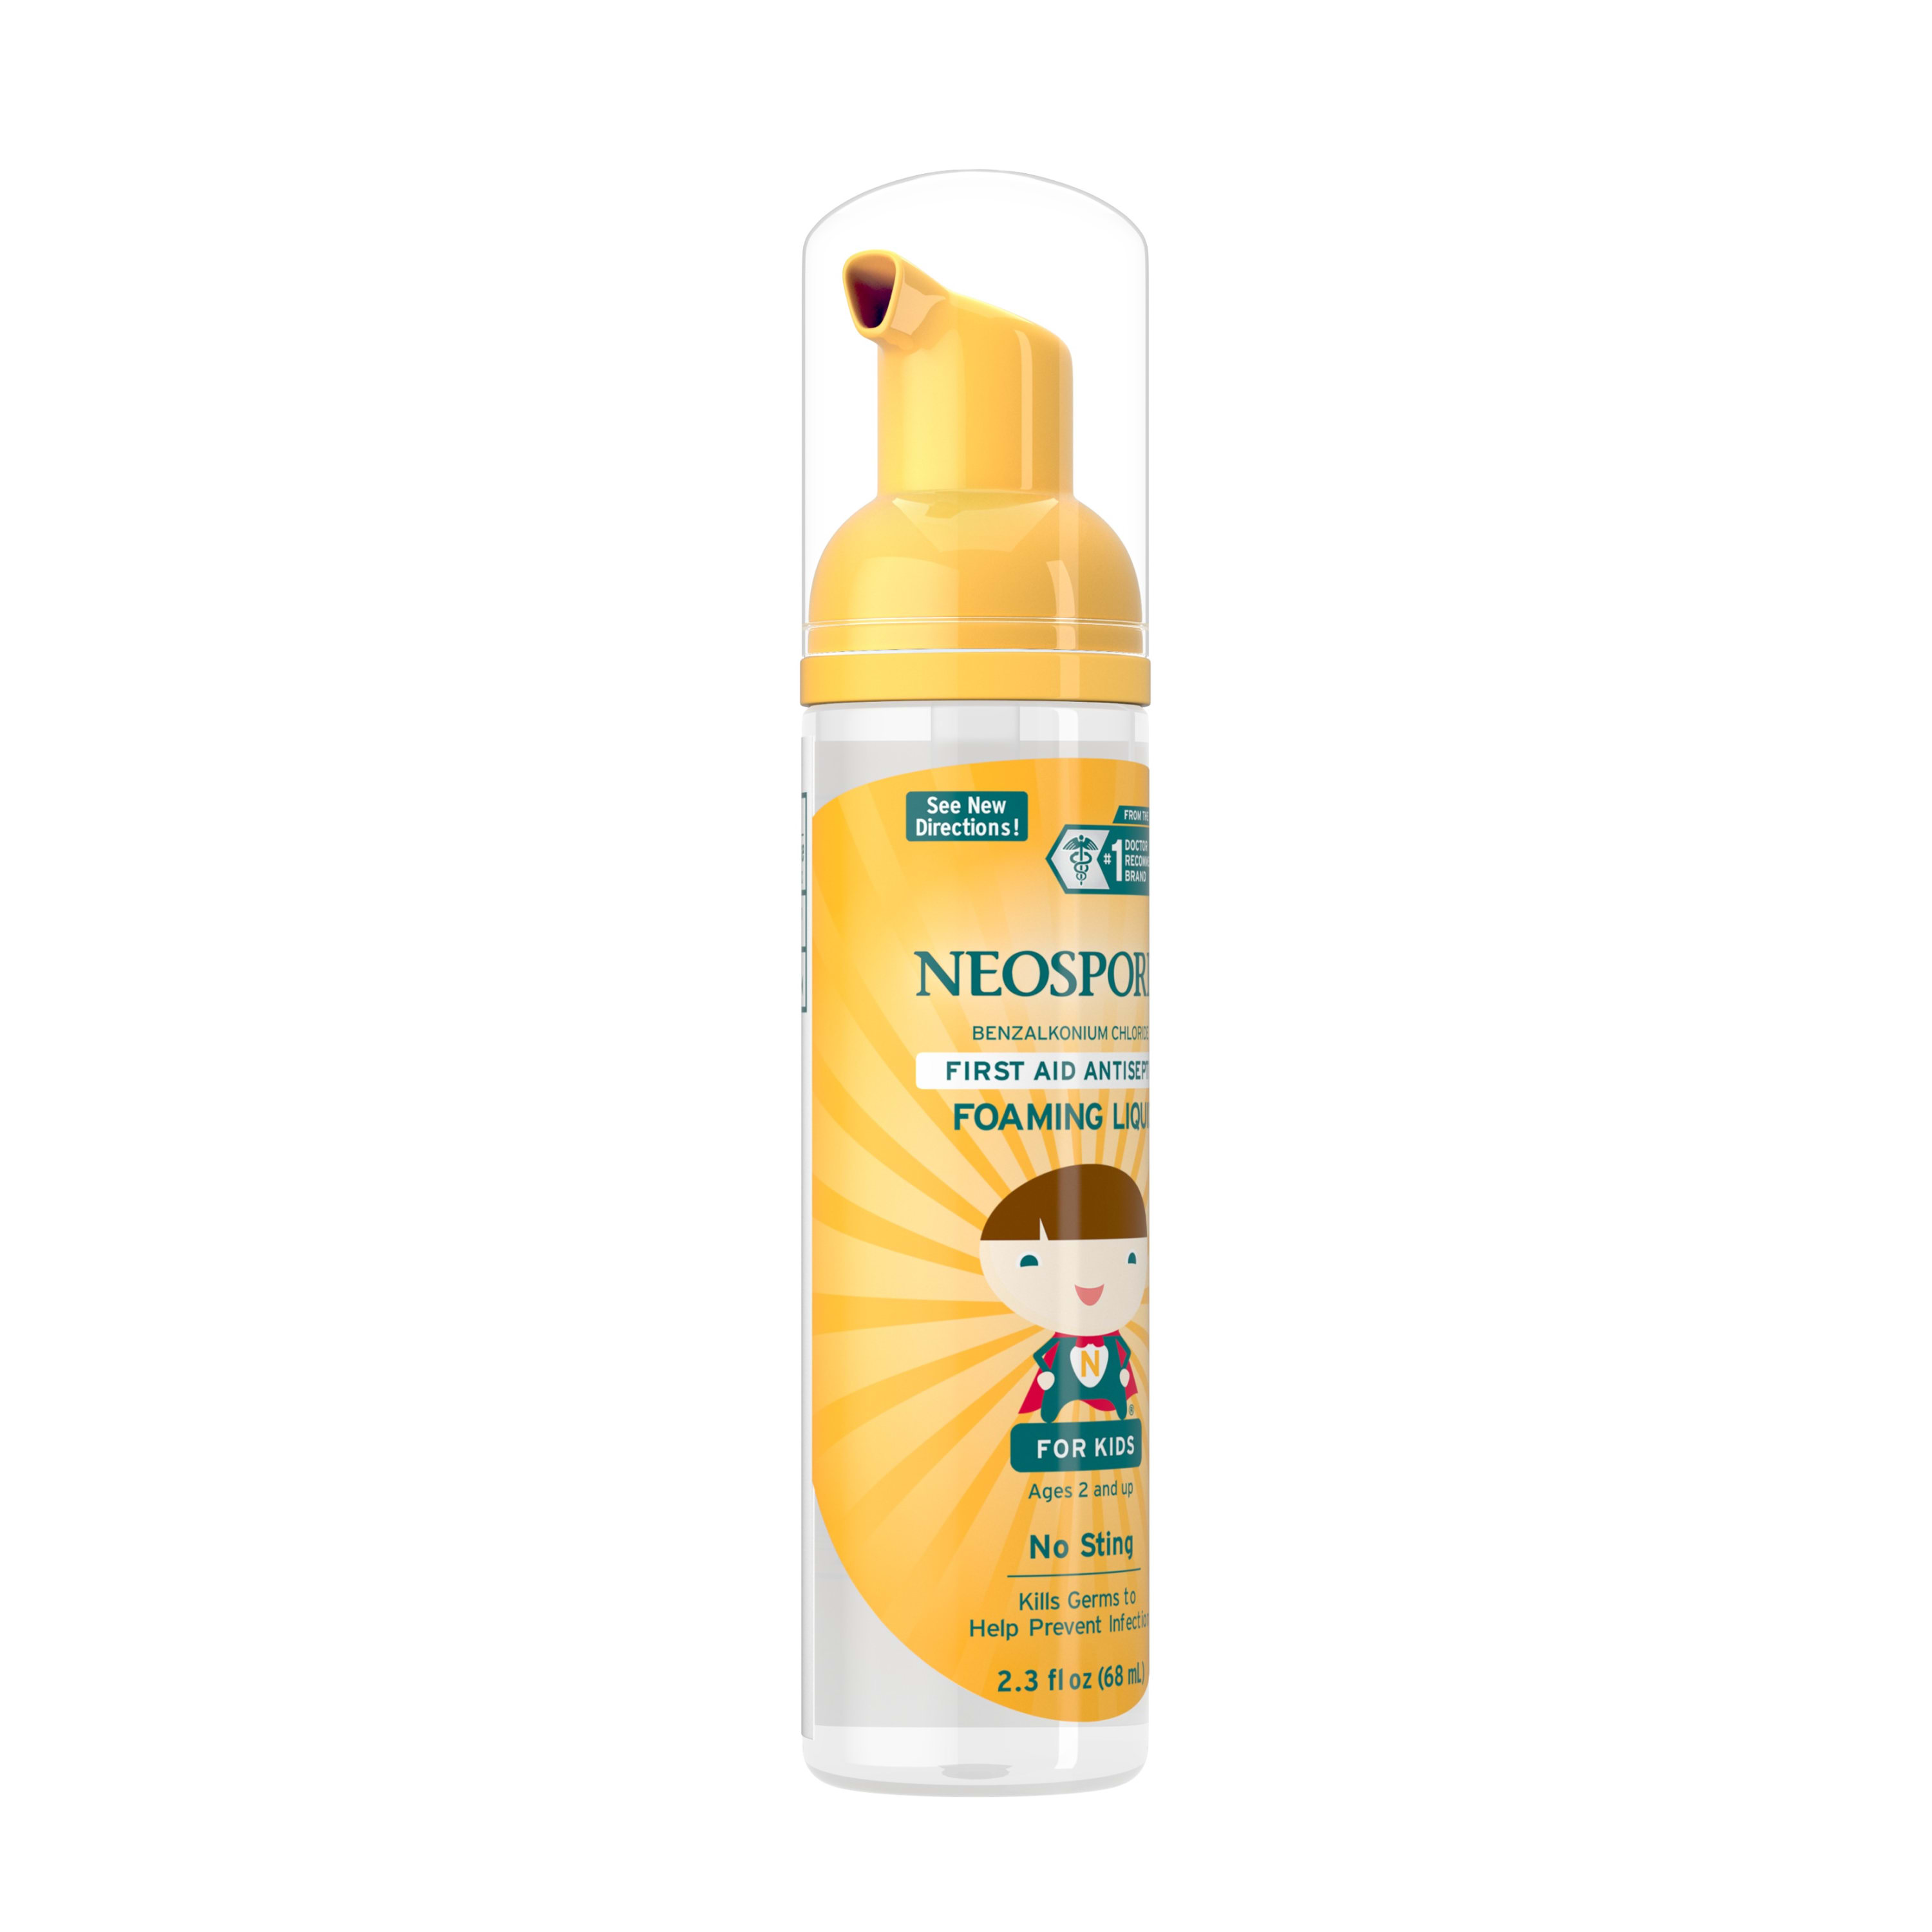 Neosporin Wound Cleanser For Kids To Help Kill Bacteria, 2.3 Oz - image 6 of 9